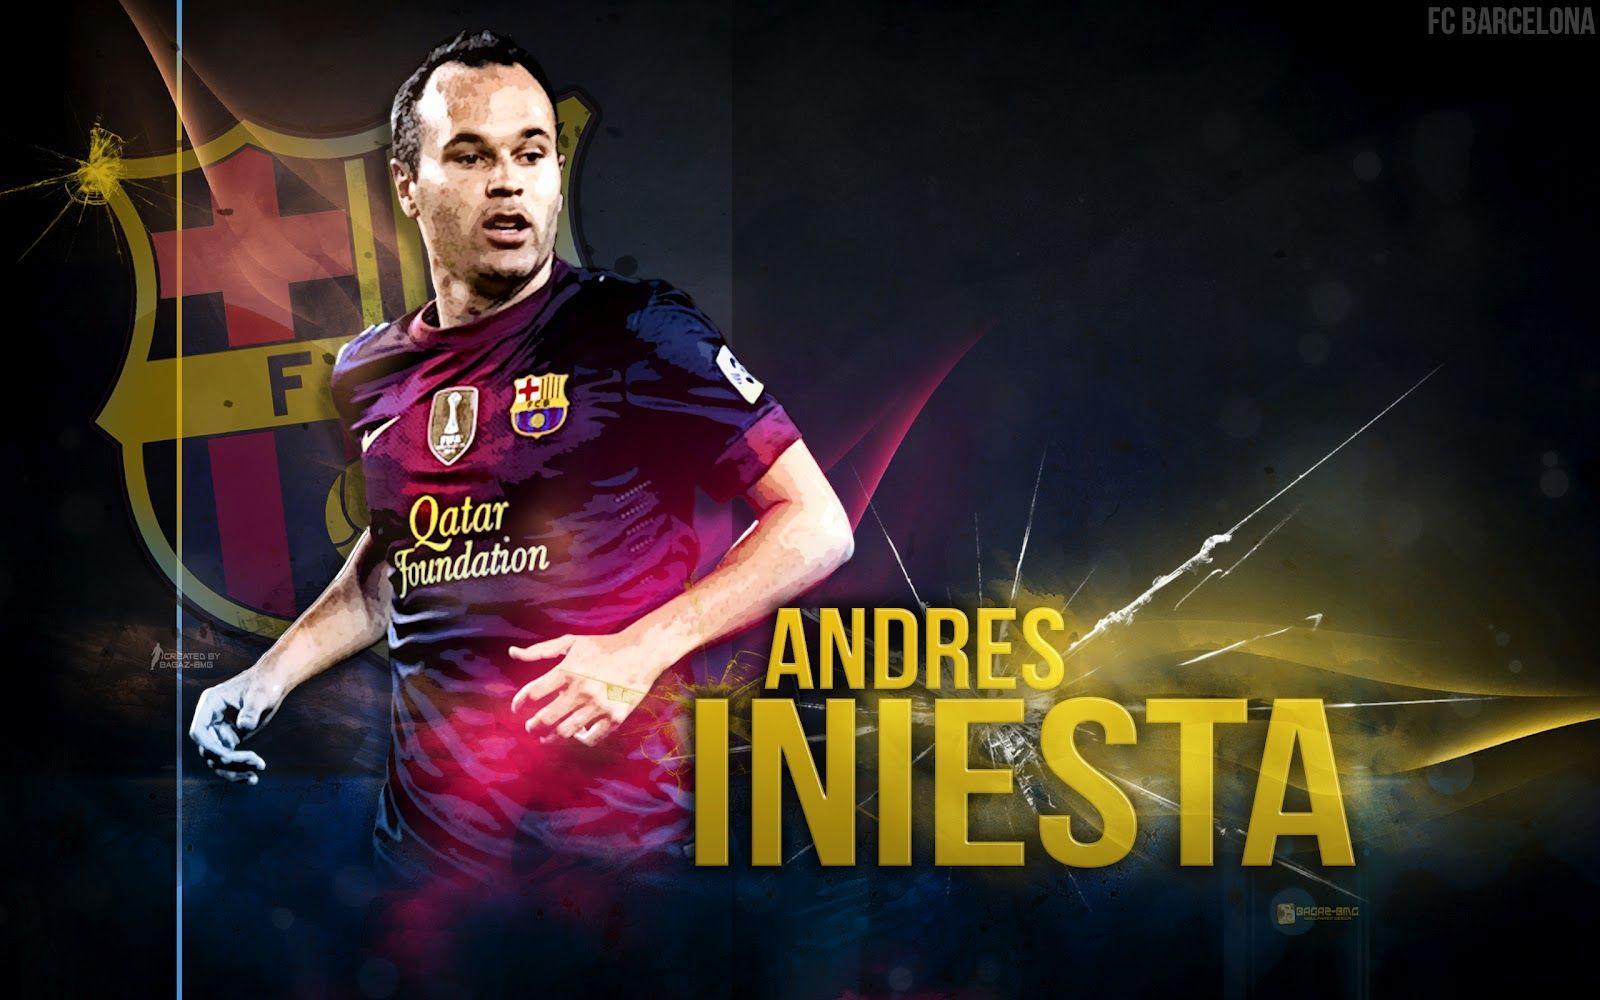 Andres Iniesta Wallpapers Wallpaper Cave Images, Photos, Reviews